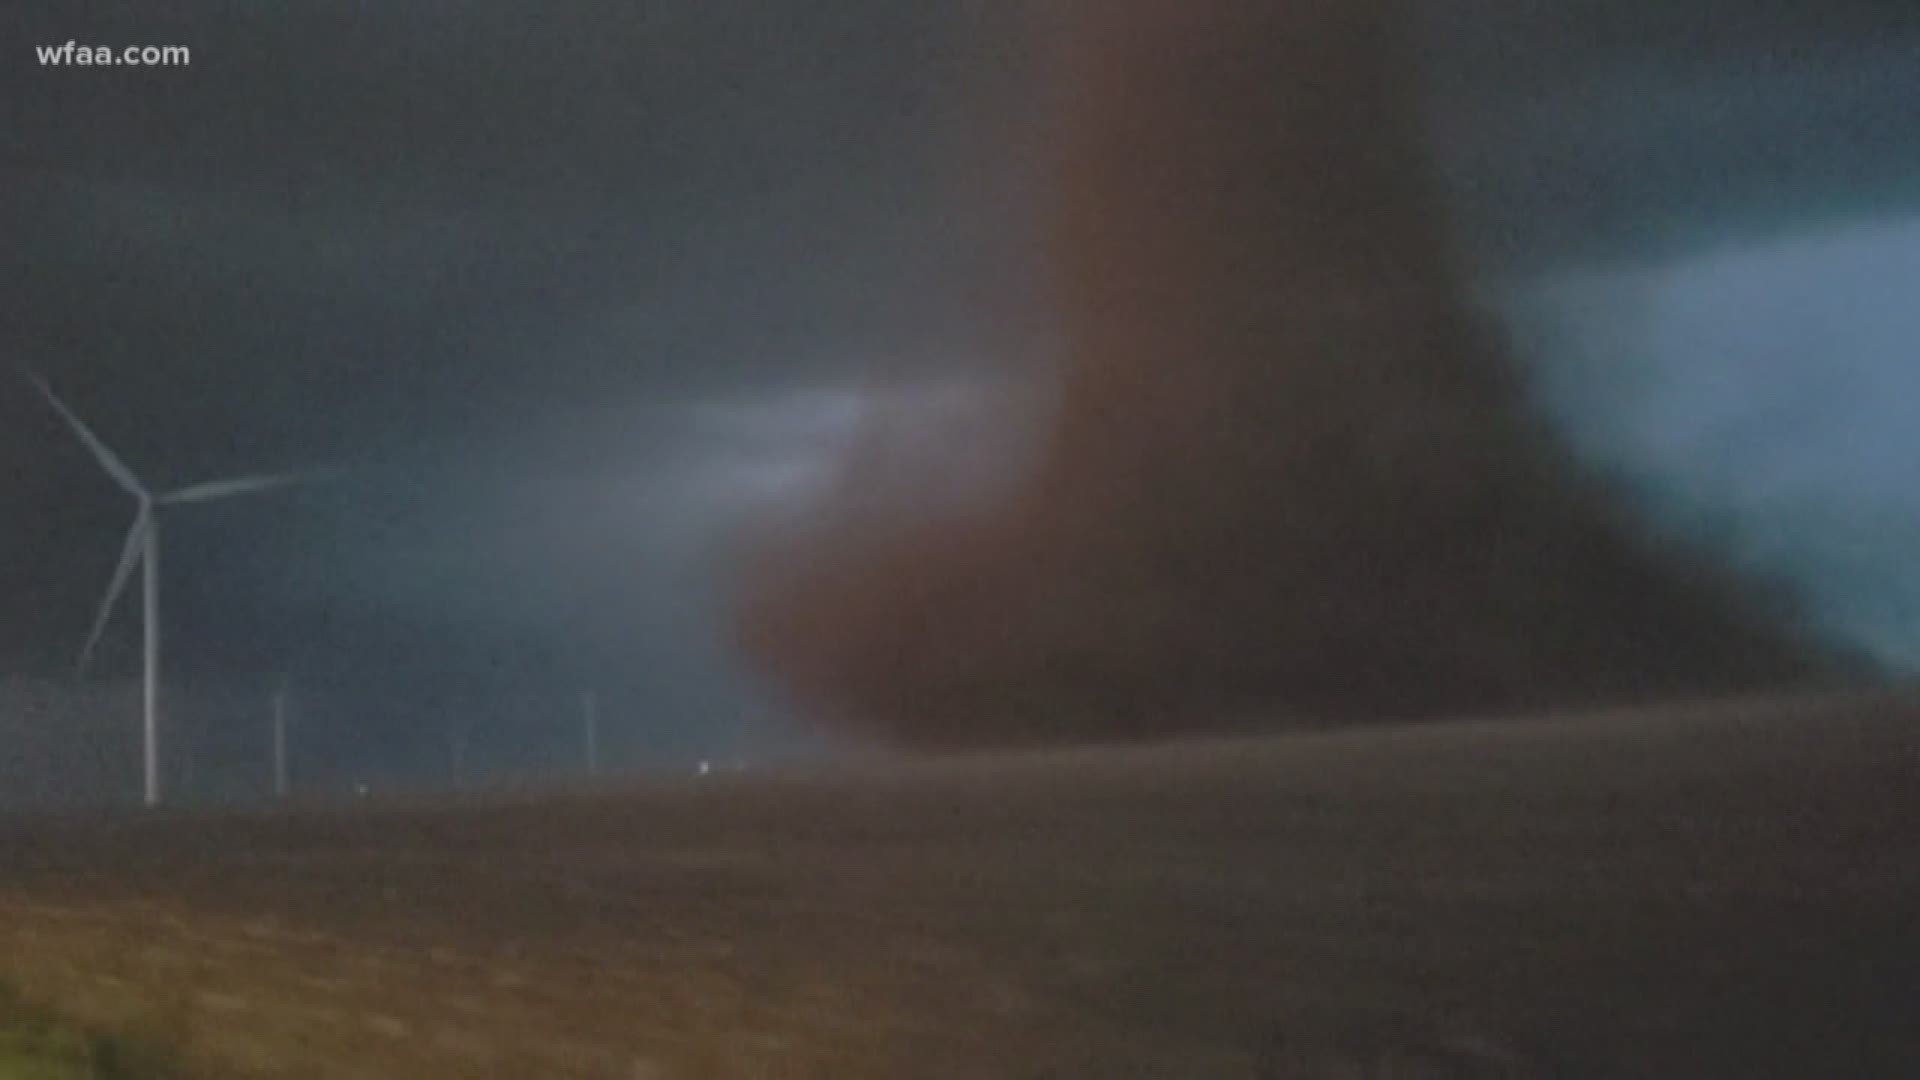 There was a tornado outbreak in Kansas on May 17, and much of it was caught on camera. One tornado was also caught on video in Fort Stockton, Texas.